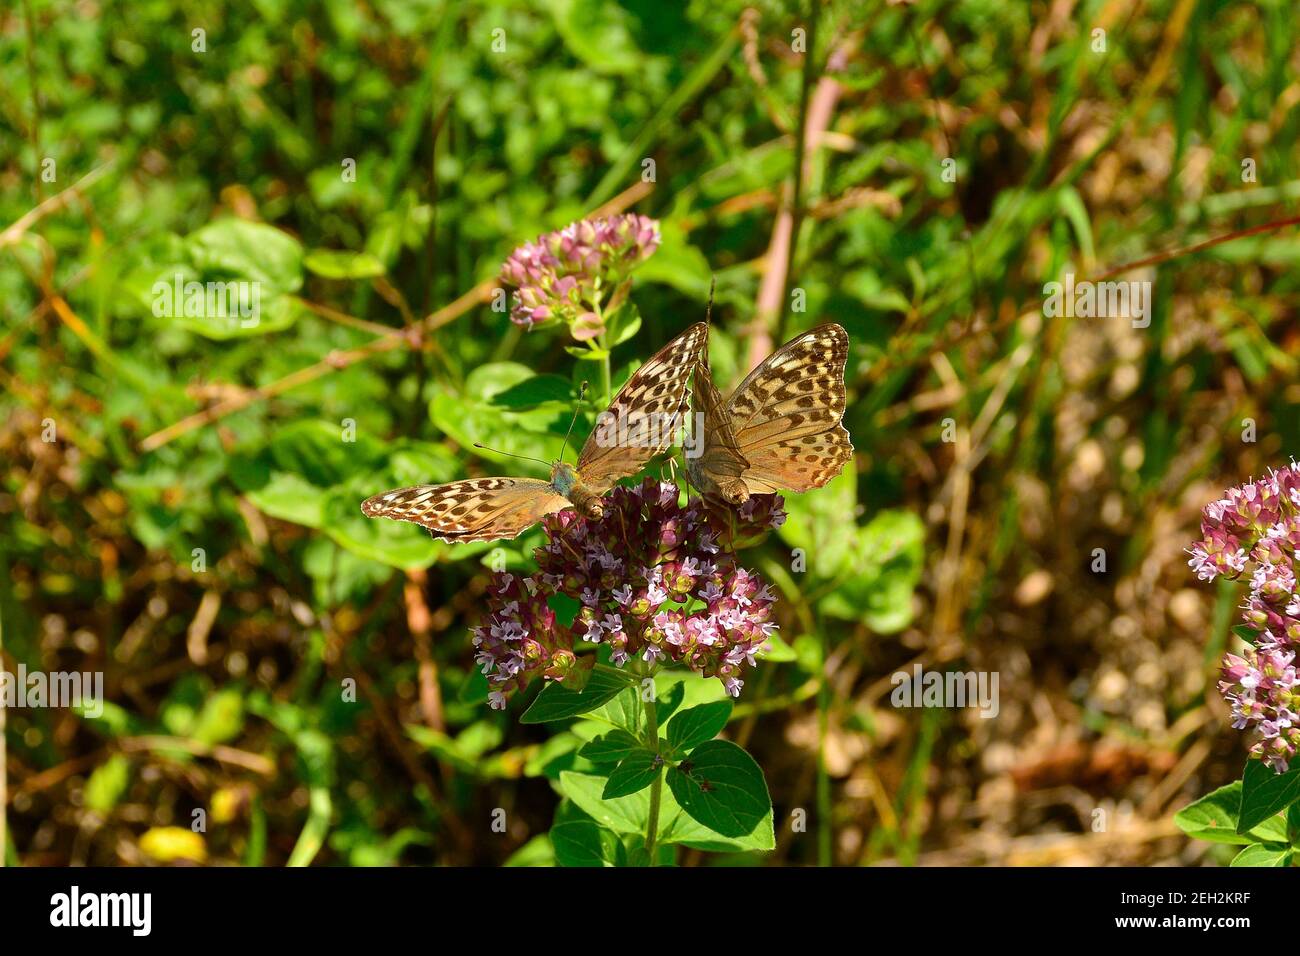 2 female Silver Washed Fritillary Butterflies in north east Italy. They are on the flowers of perrenial herb Asclepias Syriaca, AKA Common Milk Weed Stock Photo